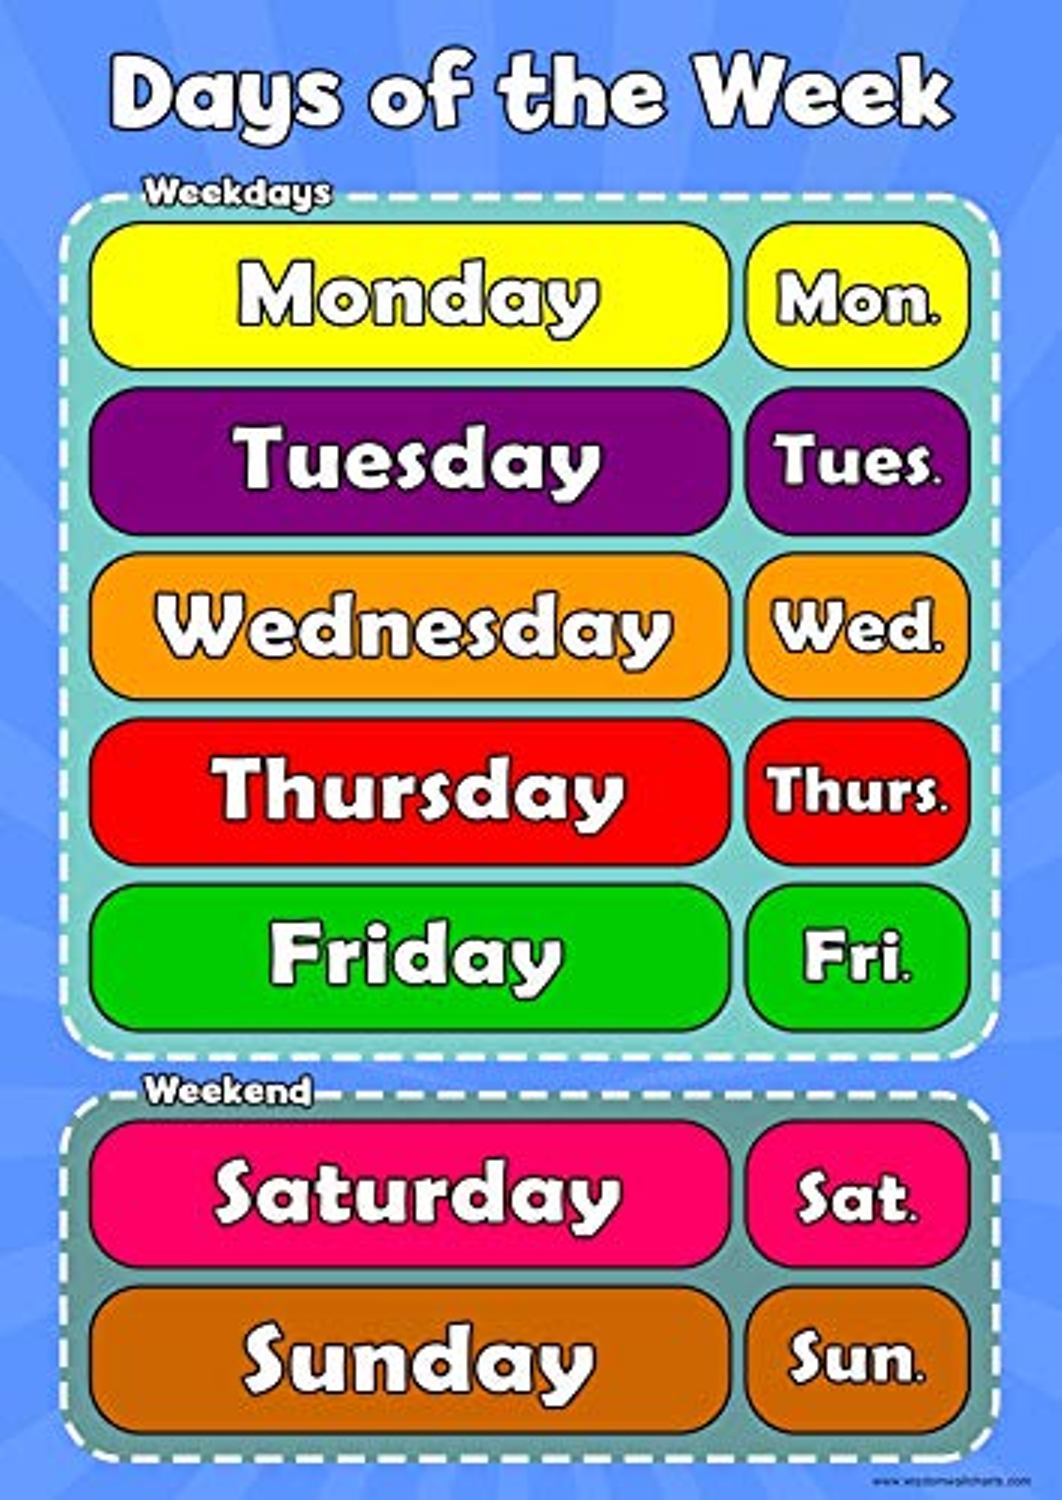 Days of the week. Days of the week плакат. Days of the week for Kids. Карточки Days of the week. Четверг пятница суббота воскресенье на английском